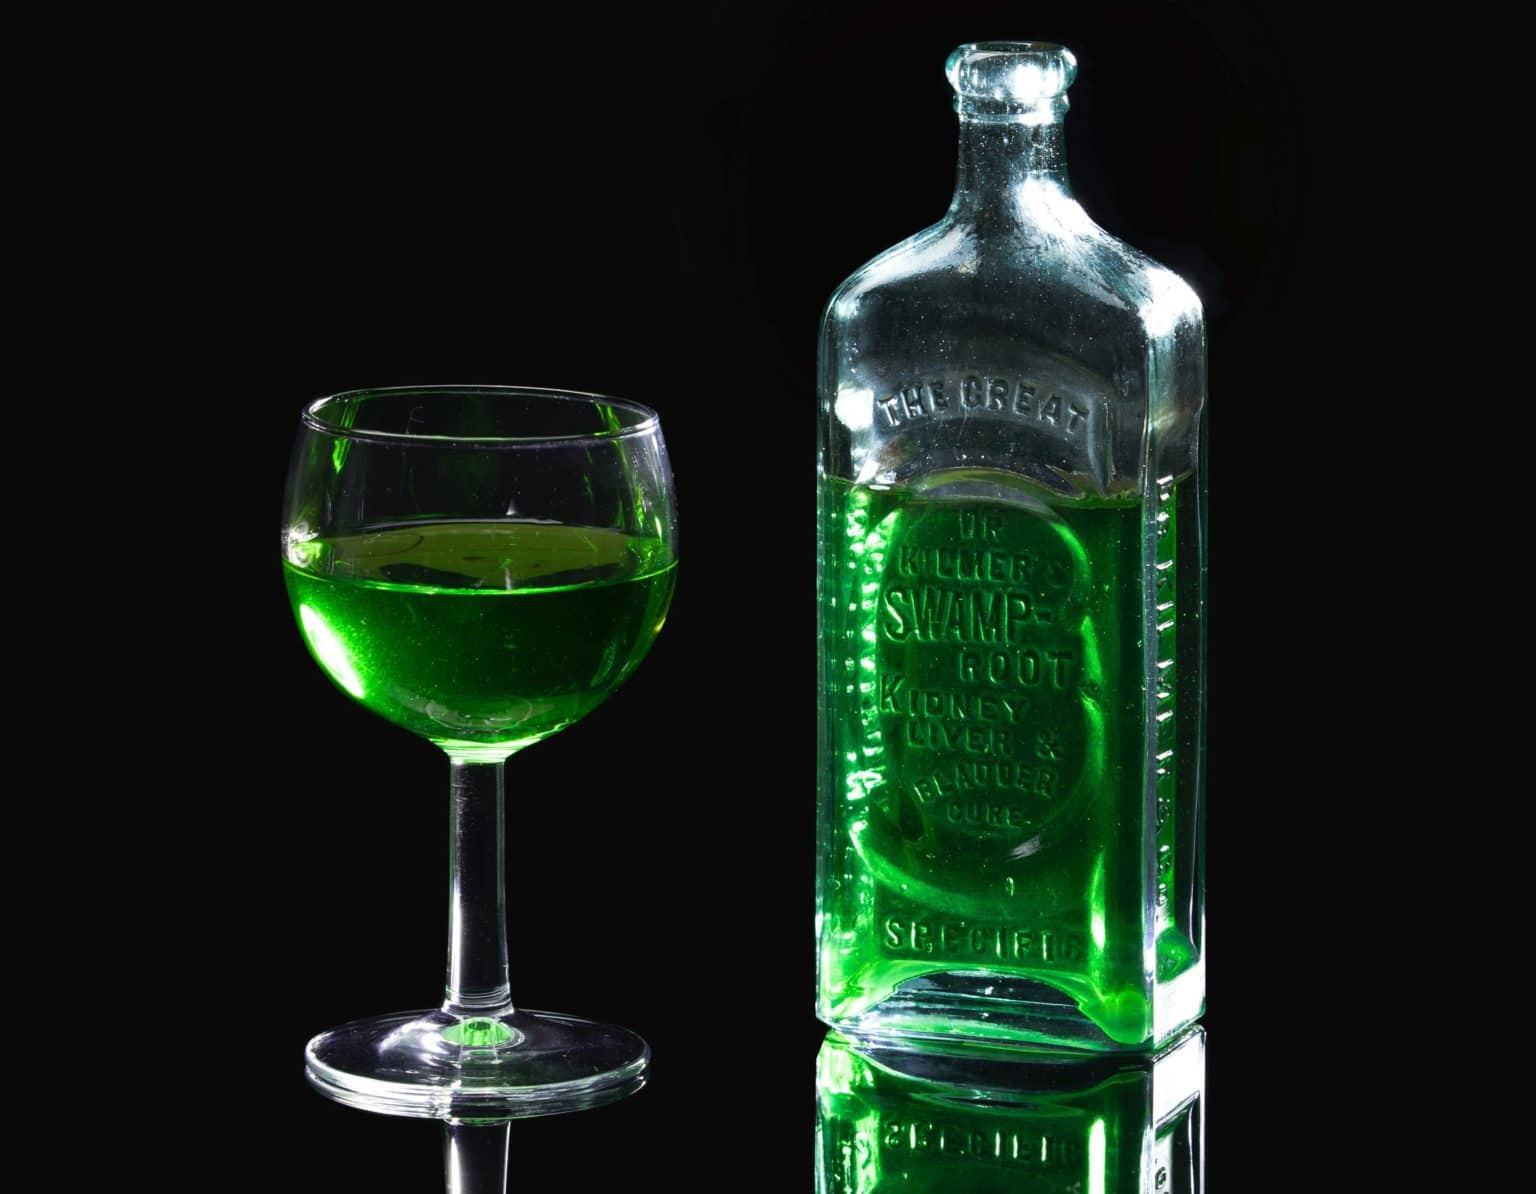 A green cocktail from a list of Absinthe cocktail recipes next to a bottle of green Absinthe